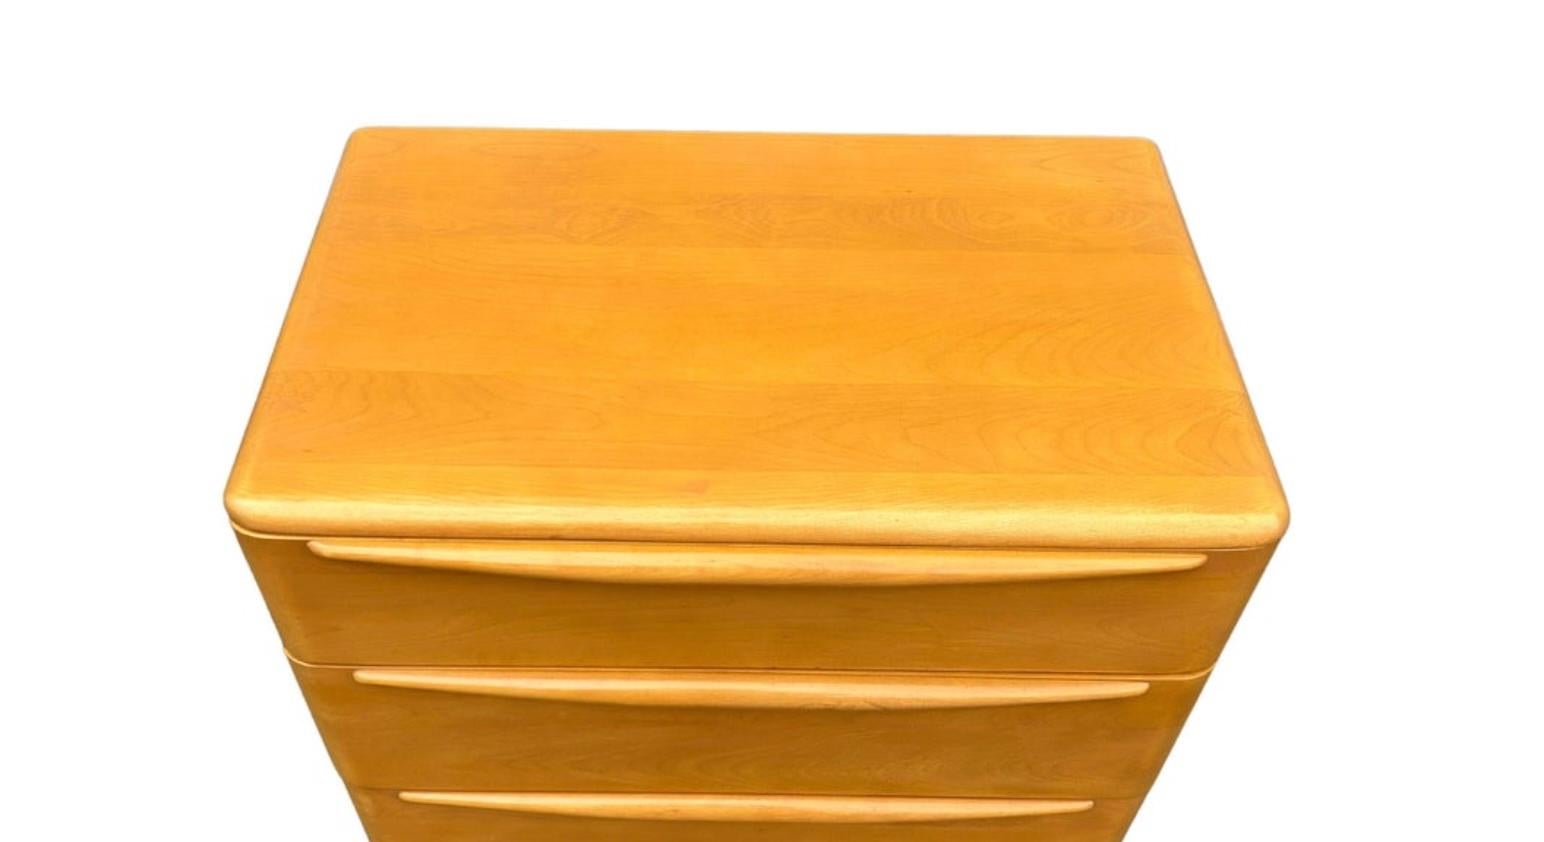 Timeless Heywood Wakefield Mid-Century Modern 5 drawer tall dresser. All solid maple construction with sculpted legs and drawer handles. Good vintage condition original blonde finish clean inside and out. Circa 1950 - Located in Brooklyn